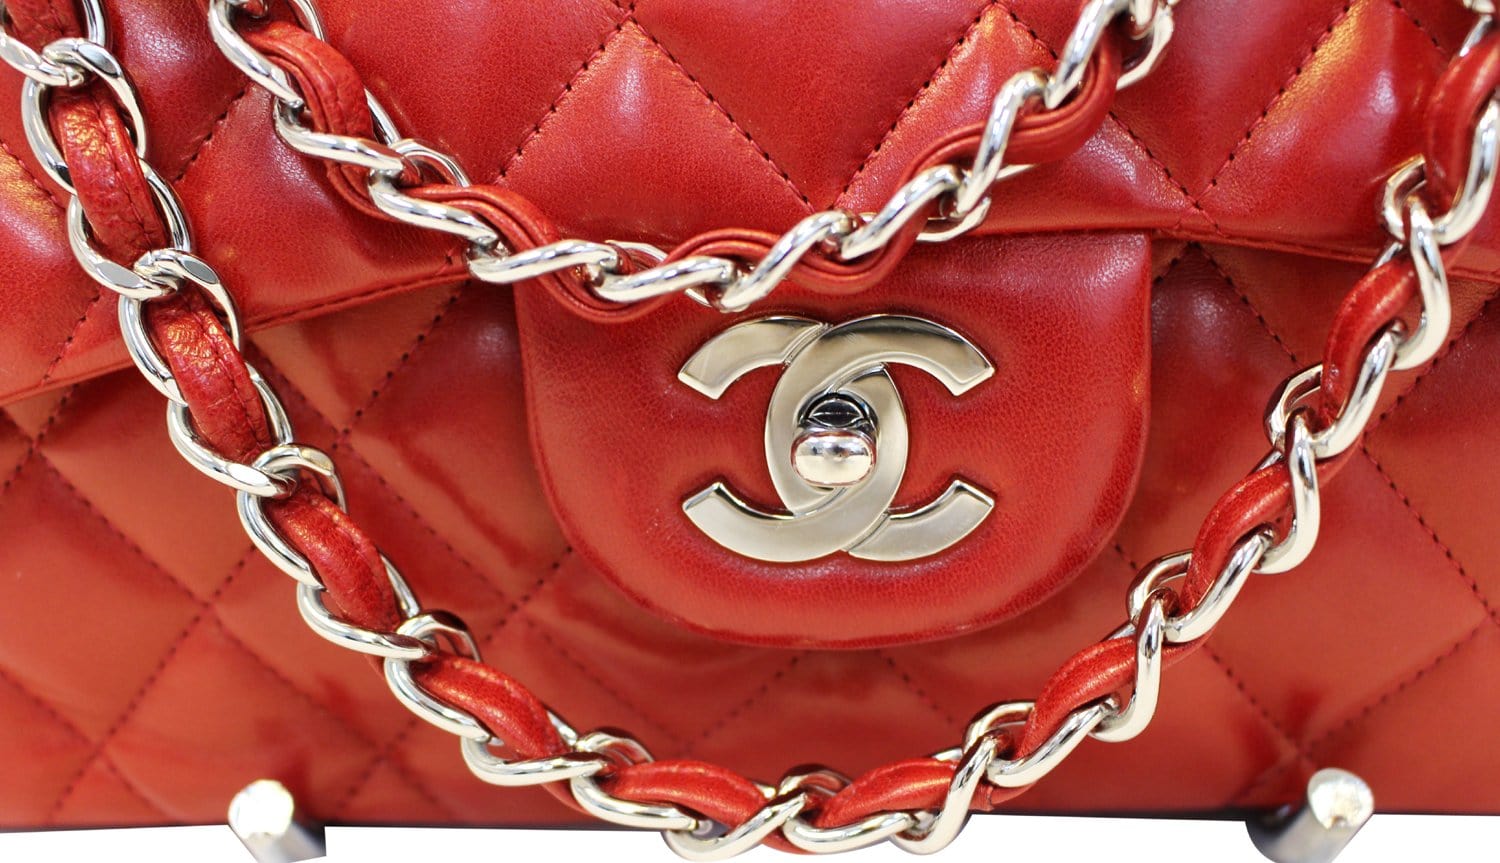 CHANEL Caviar Quilted Jumbo Double Flap Red 1109195